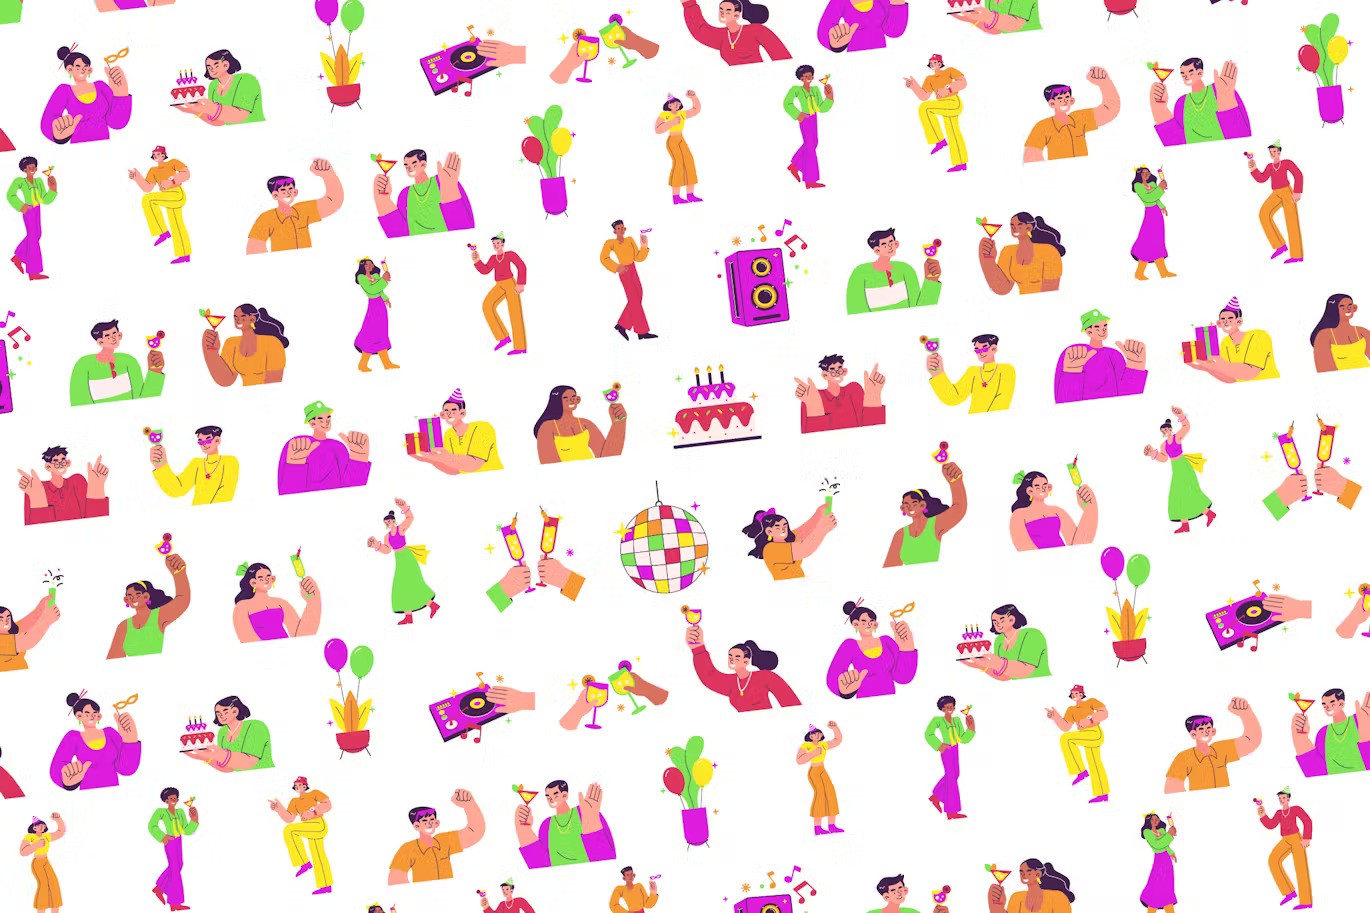 30 Images Happy People Party Illustrations-1.jpg